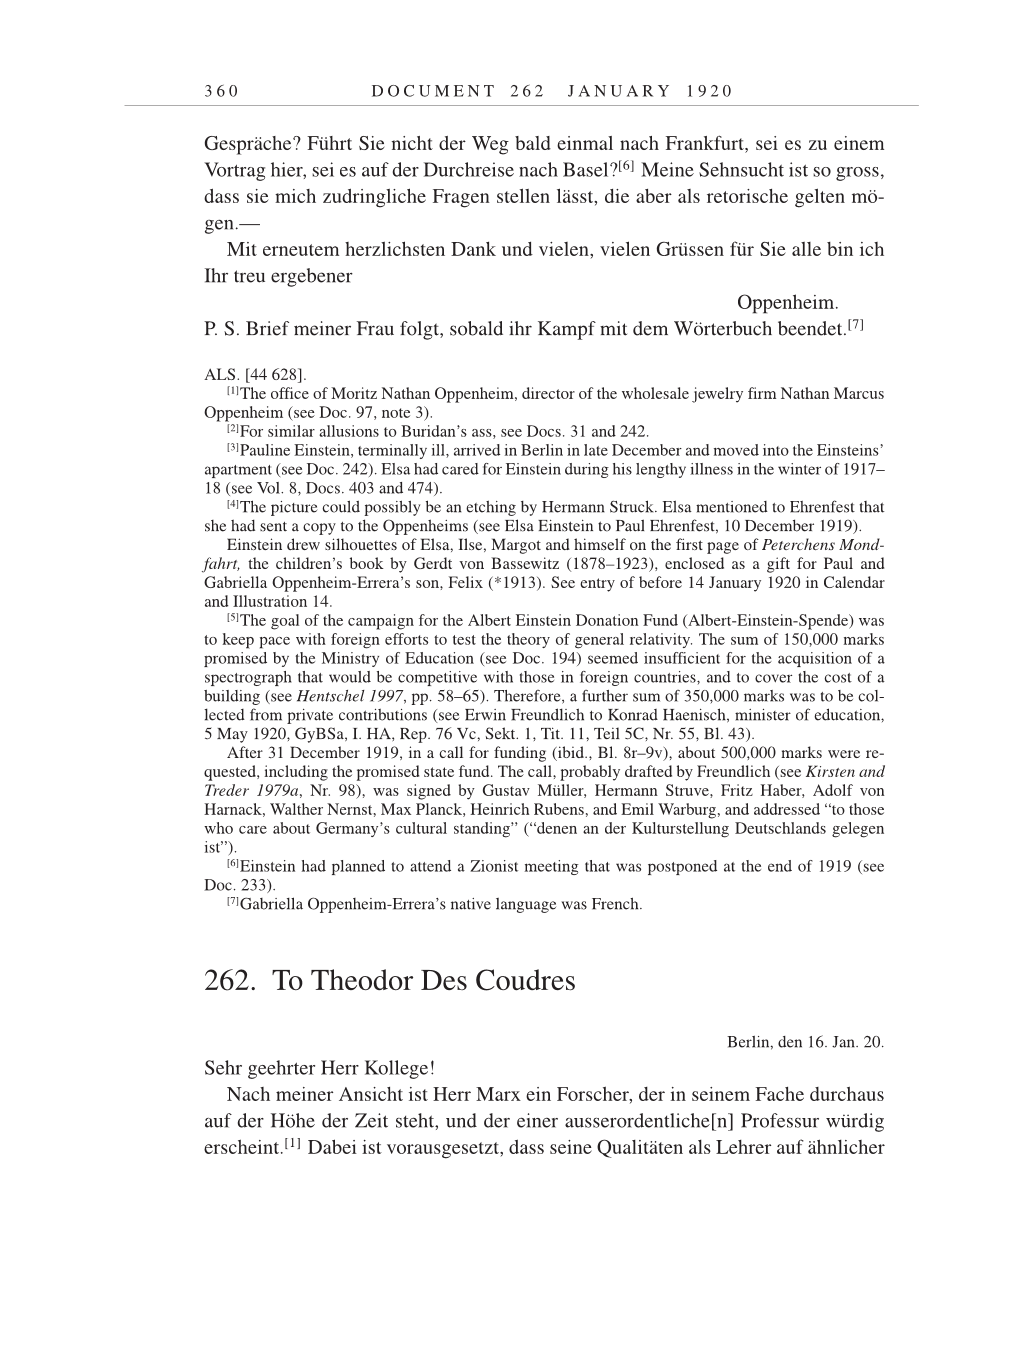 Volume 9: The Berlin Years: Correspondence January 1919-April 1920 page 360